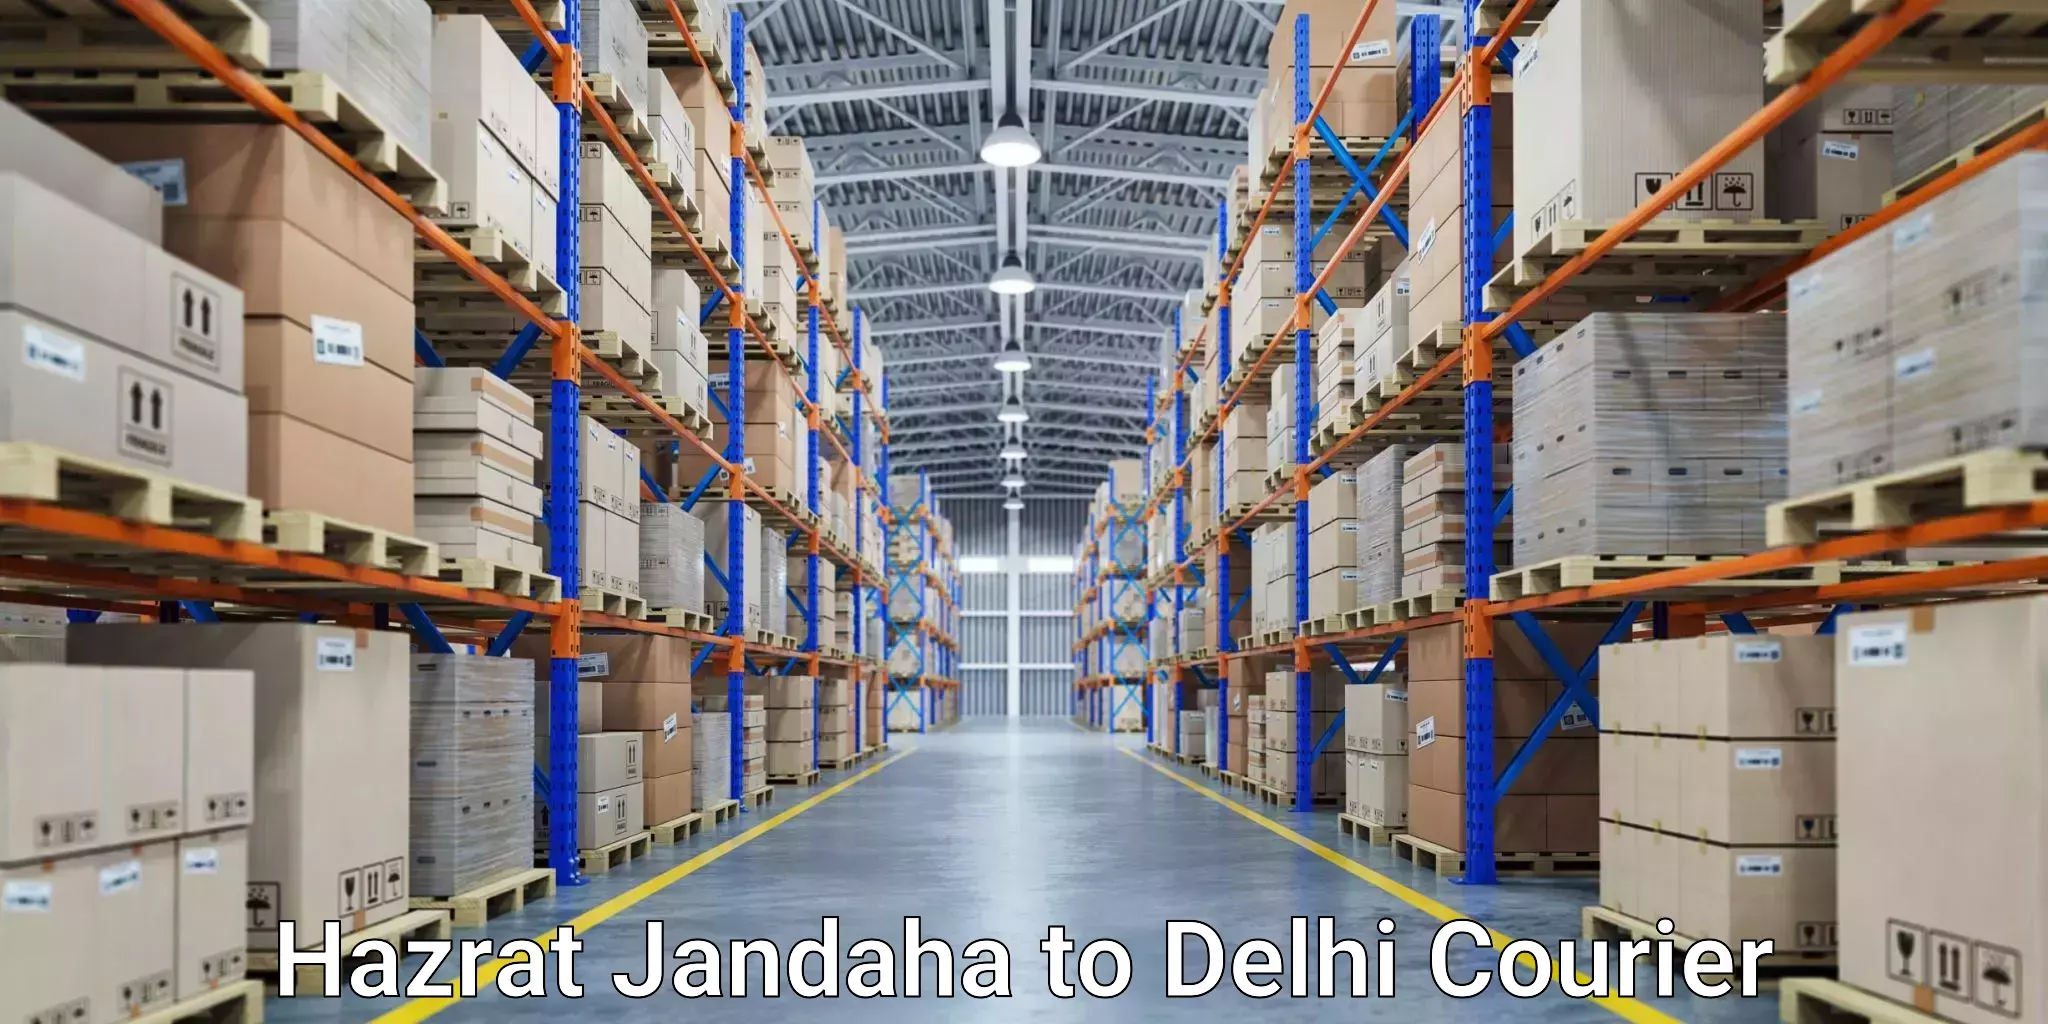 Express mail solutions Hazrat Jandaha to NCR